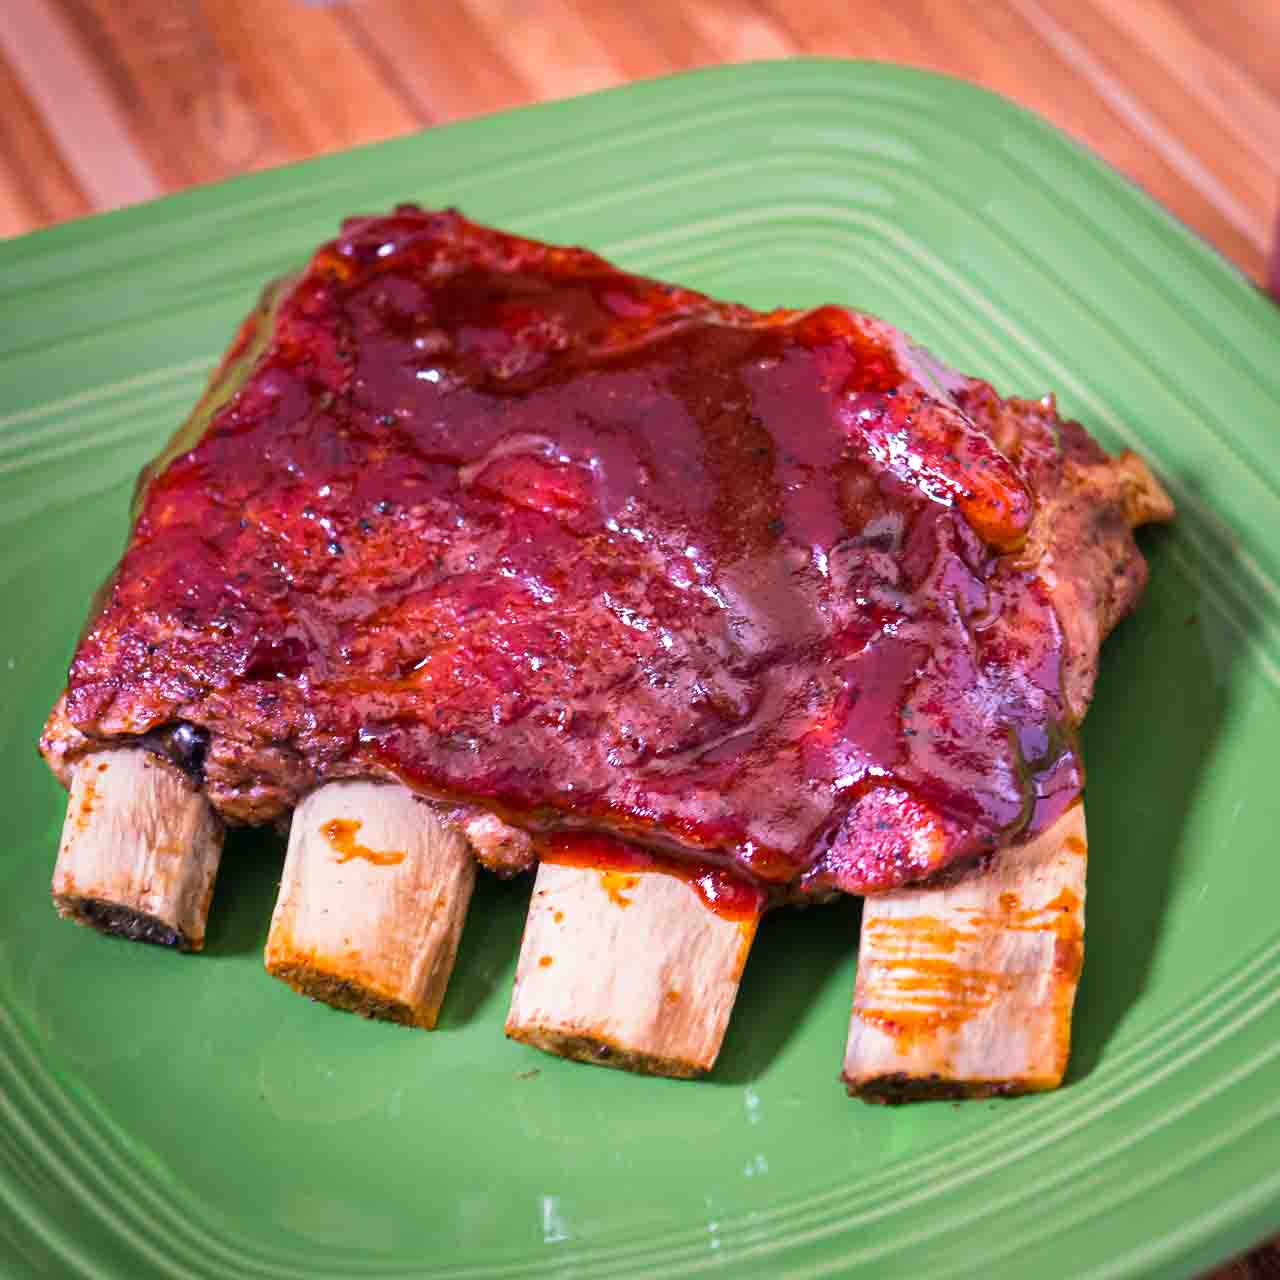 A quarter slab of St. Louis Ribs on a green plate